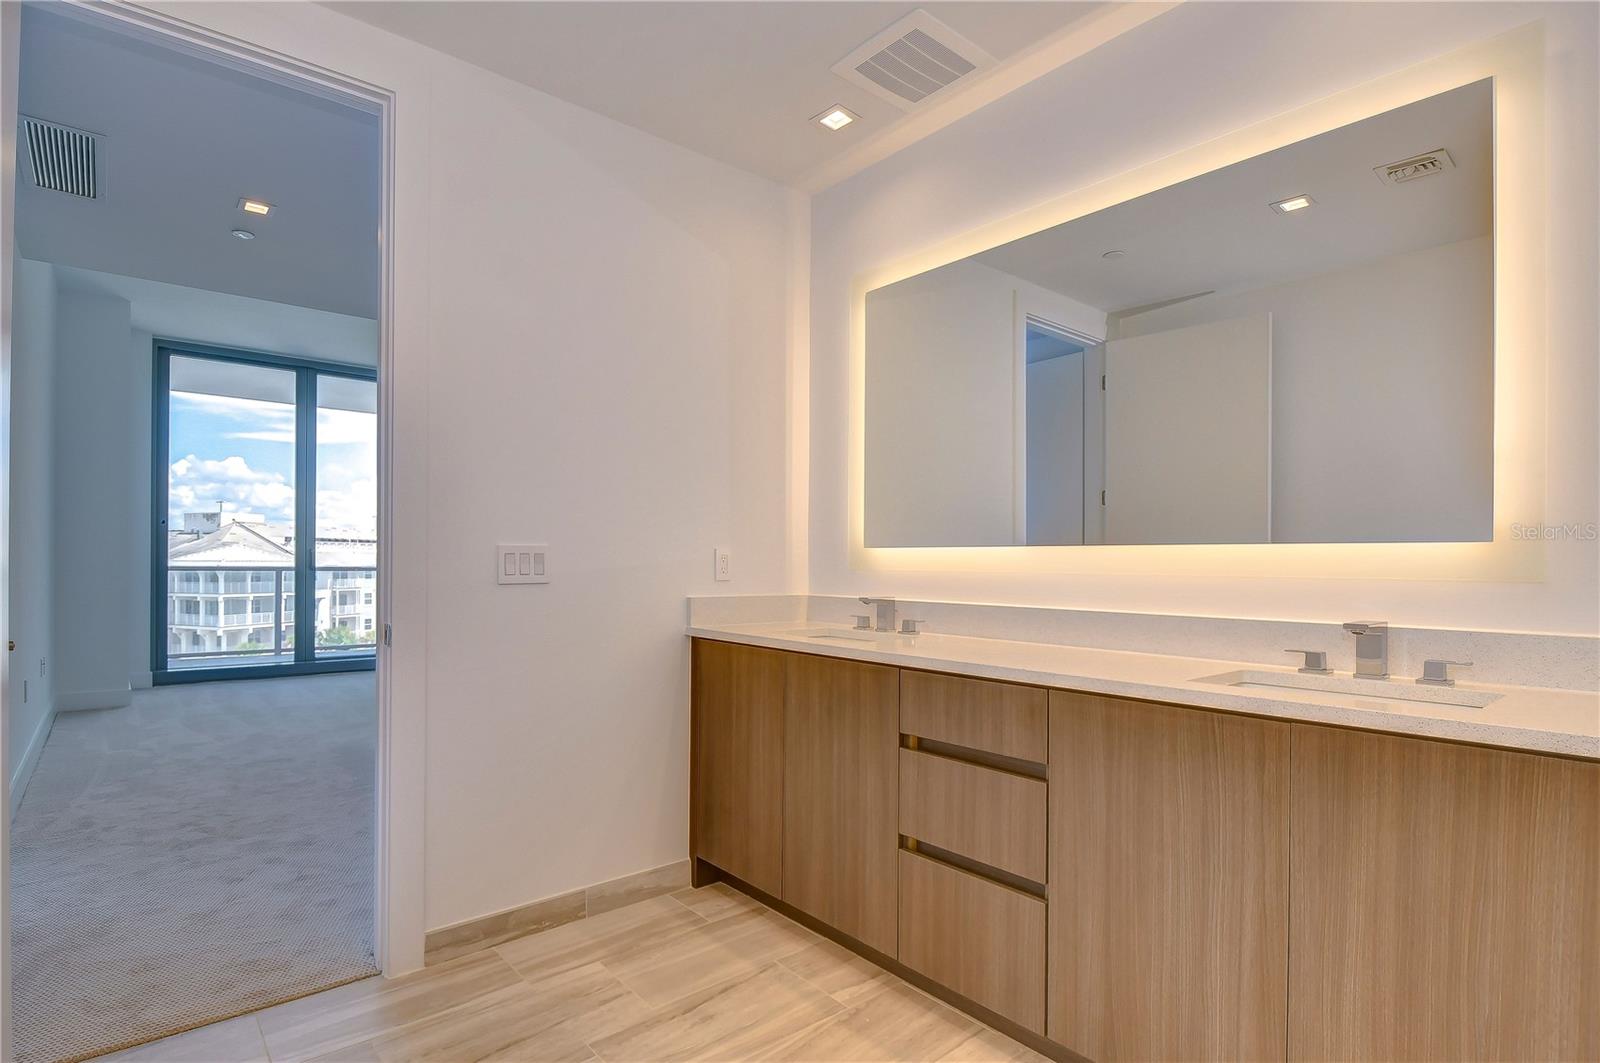 Master bathroom , from Master bedroom can view the beautiful waterview